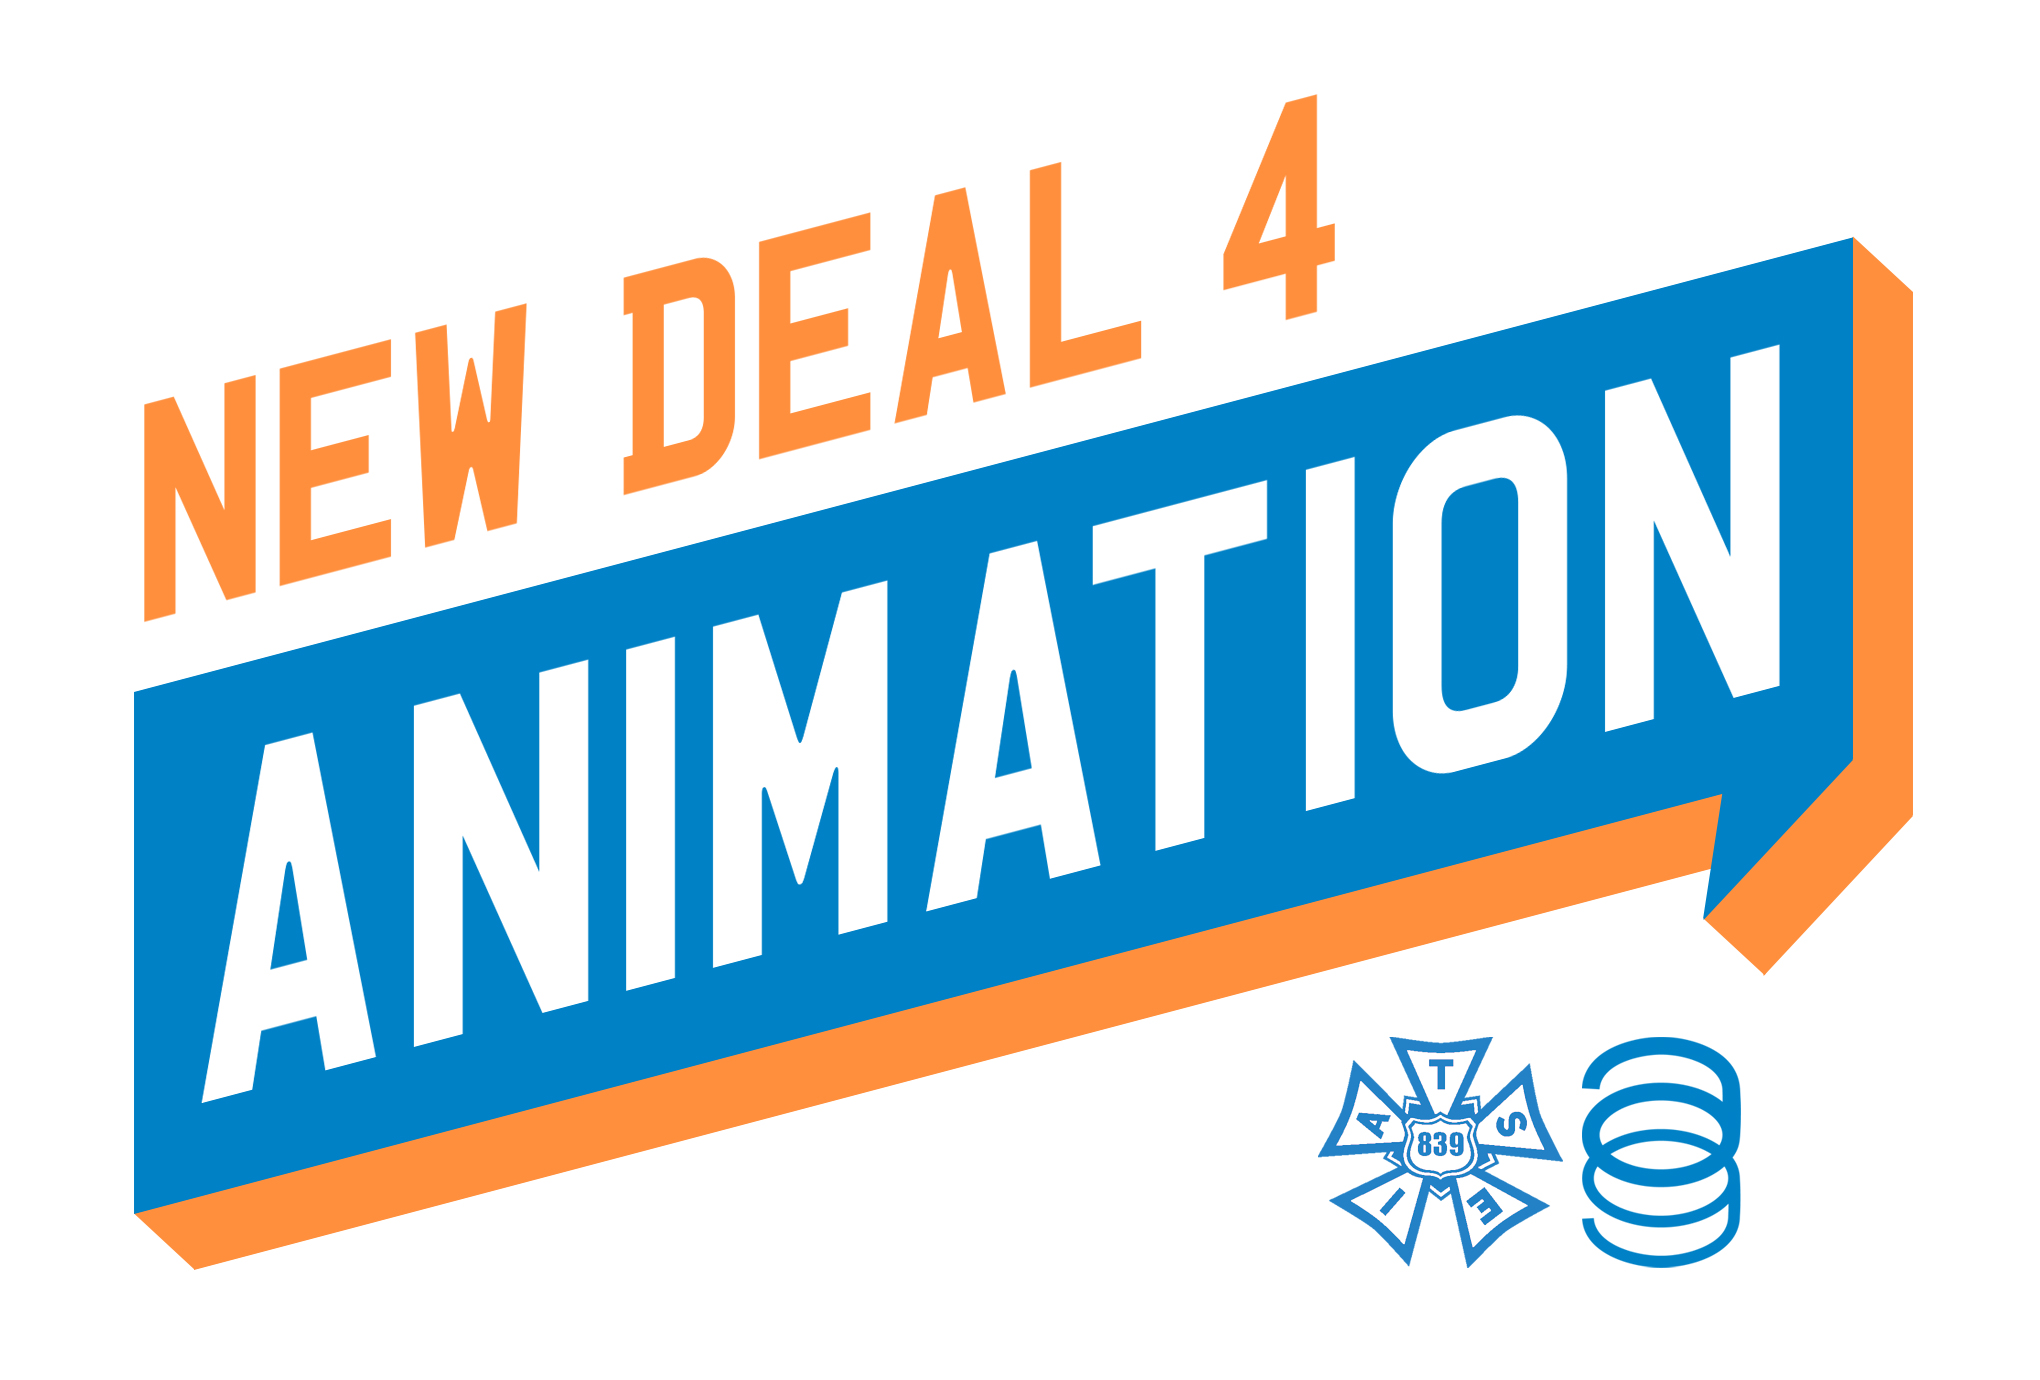 Graphic that says New Deal 4 Animation